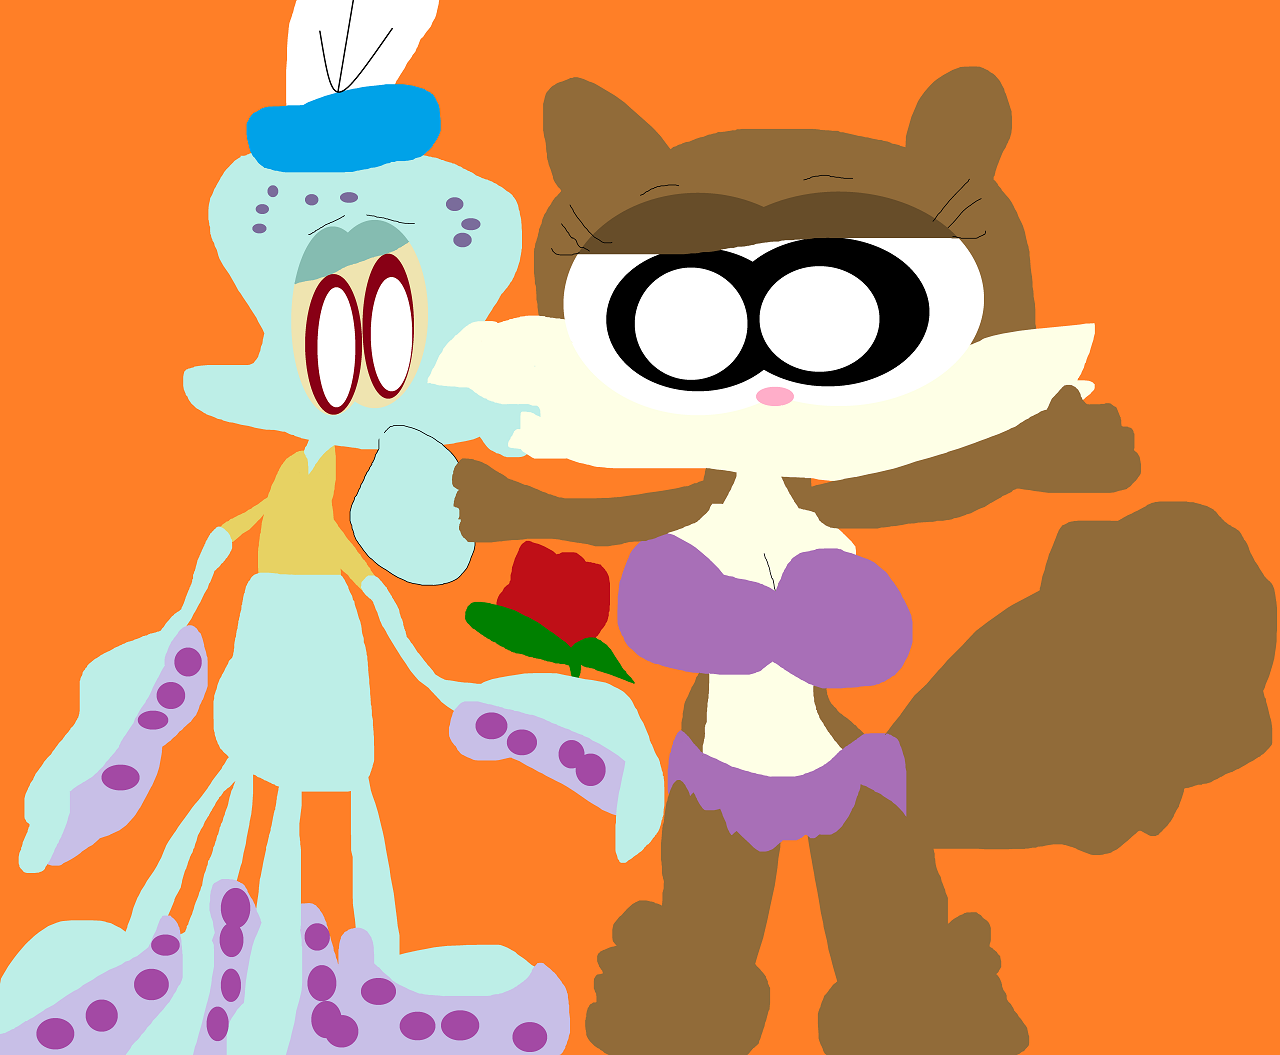 Squidward Has A Rose For Sandy During Thier Kiss by Falconlobo